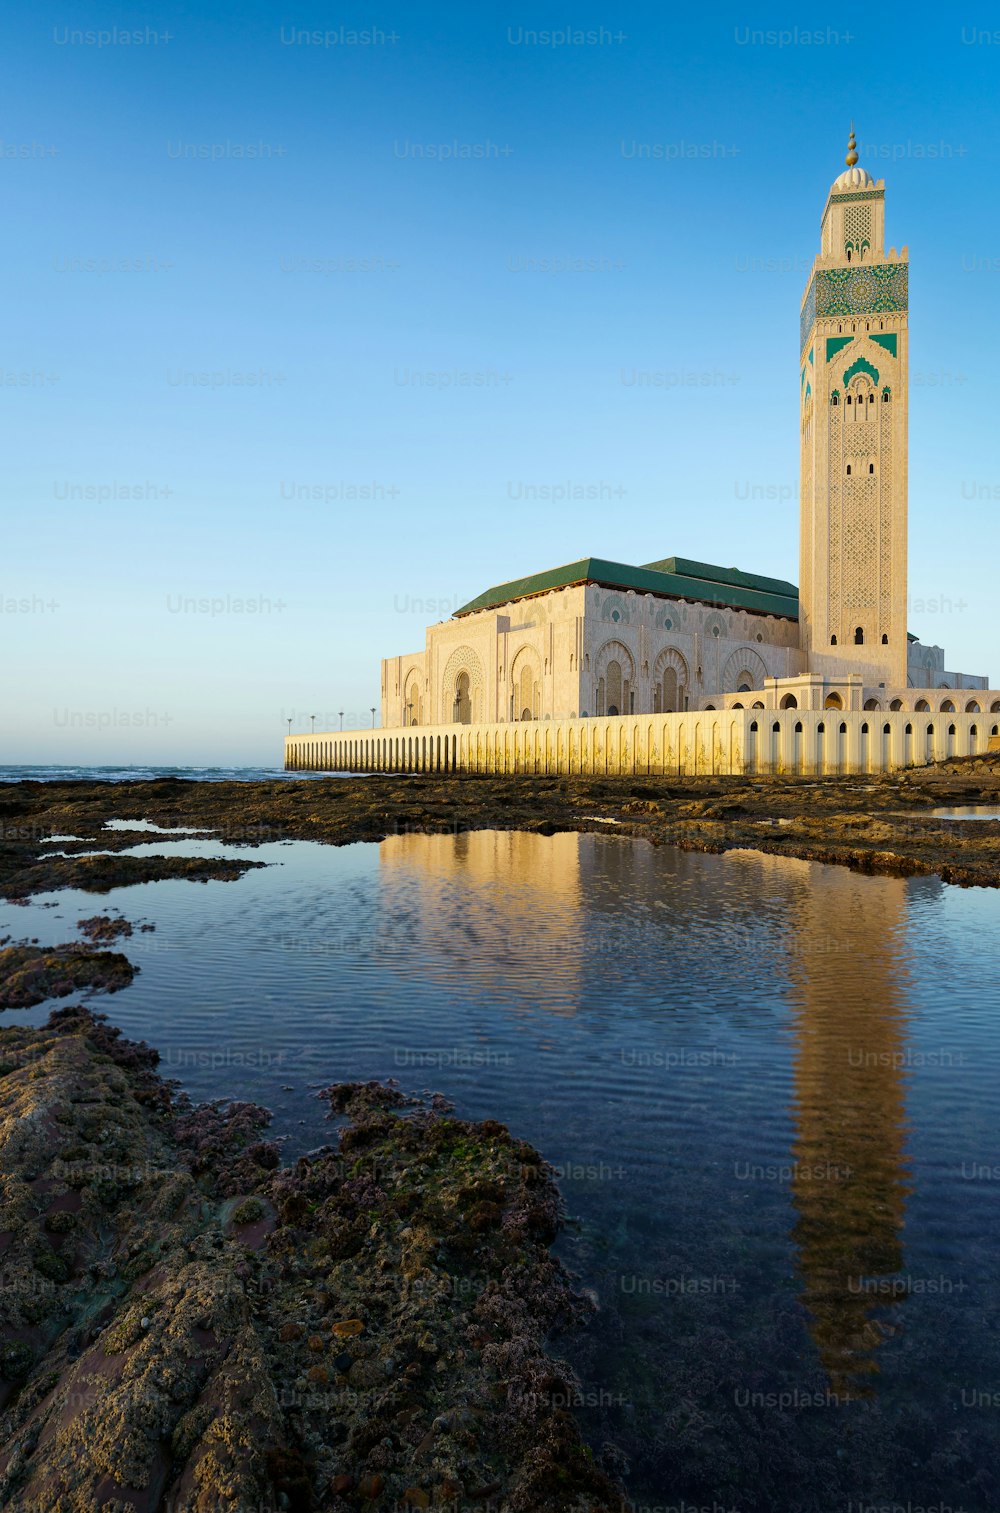 The beautiful Hassan II Mosque with its reflection on the water in Casablanca, Morocco